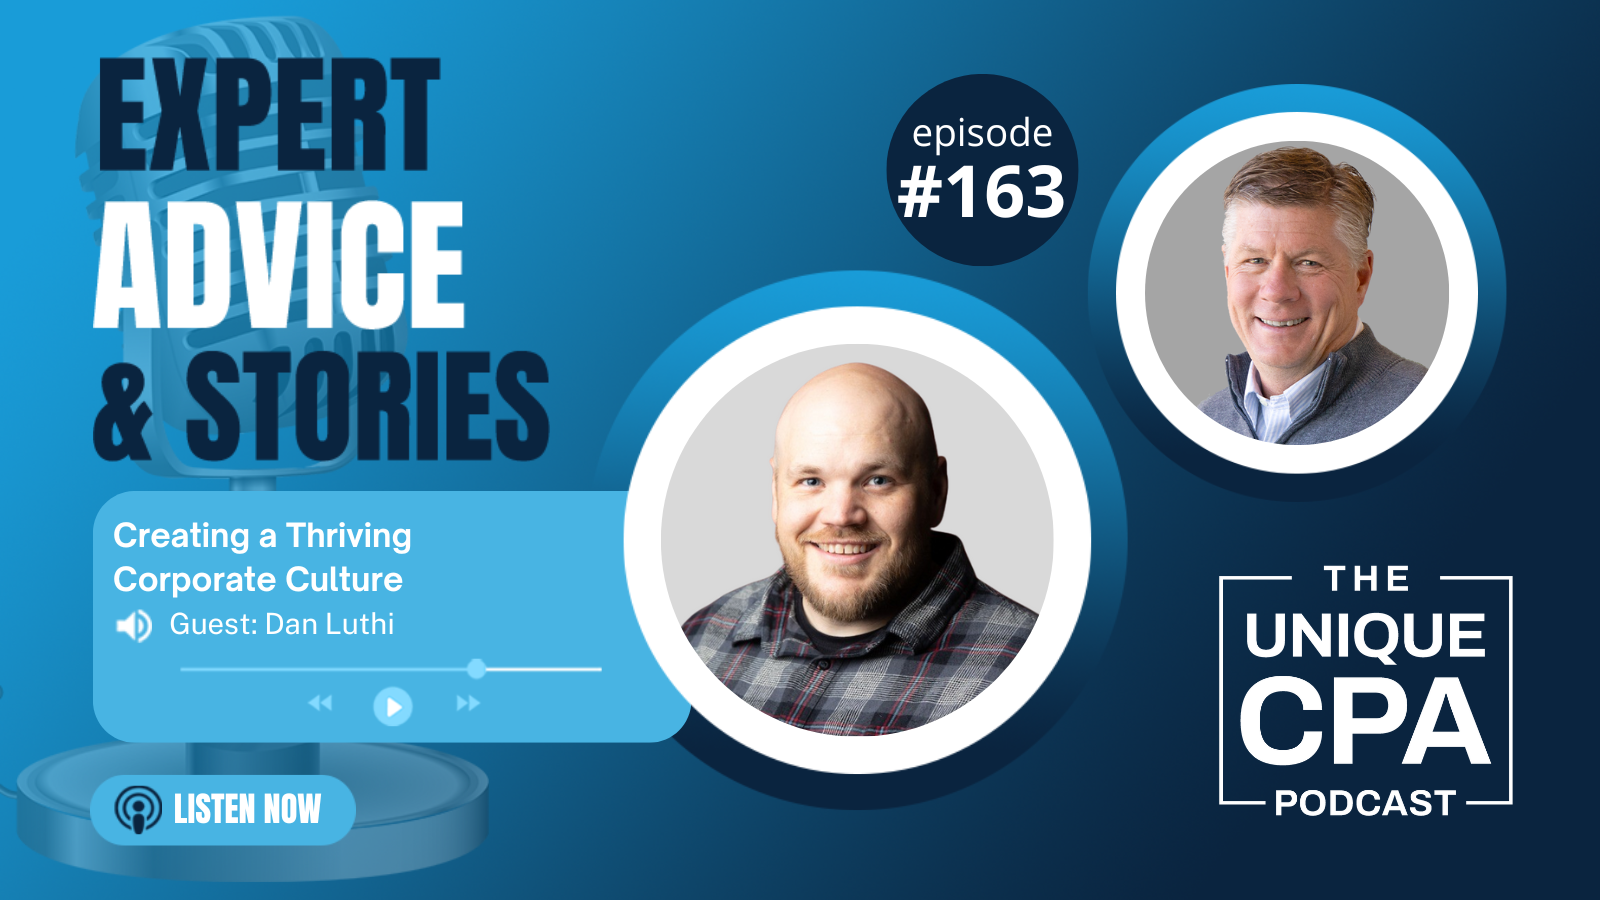 Unique Cpa Featured Image Ep 163 Dan Luthi - Creating A Thriving Corporate Culture - Tri-Merit